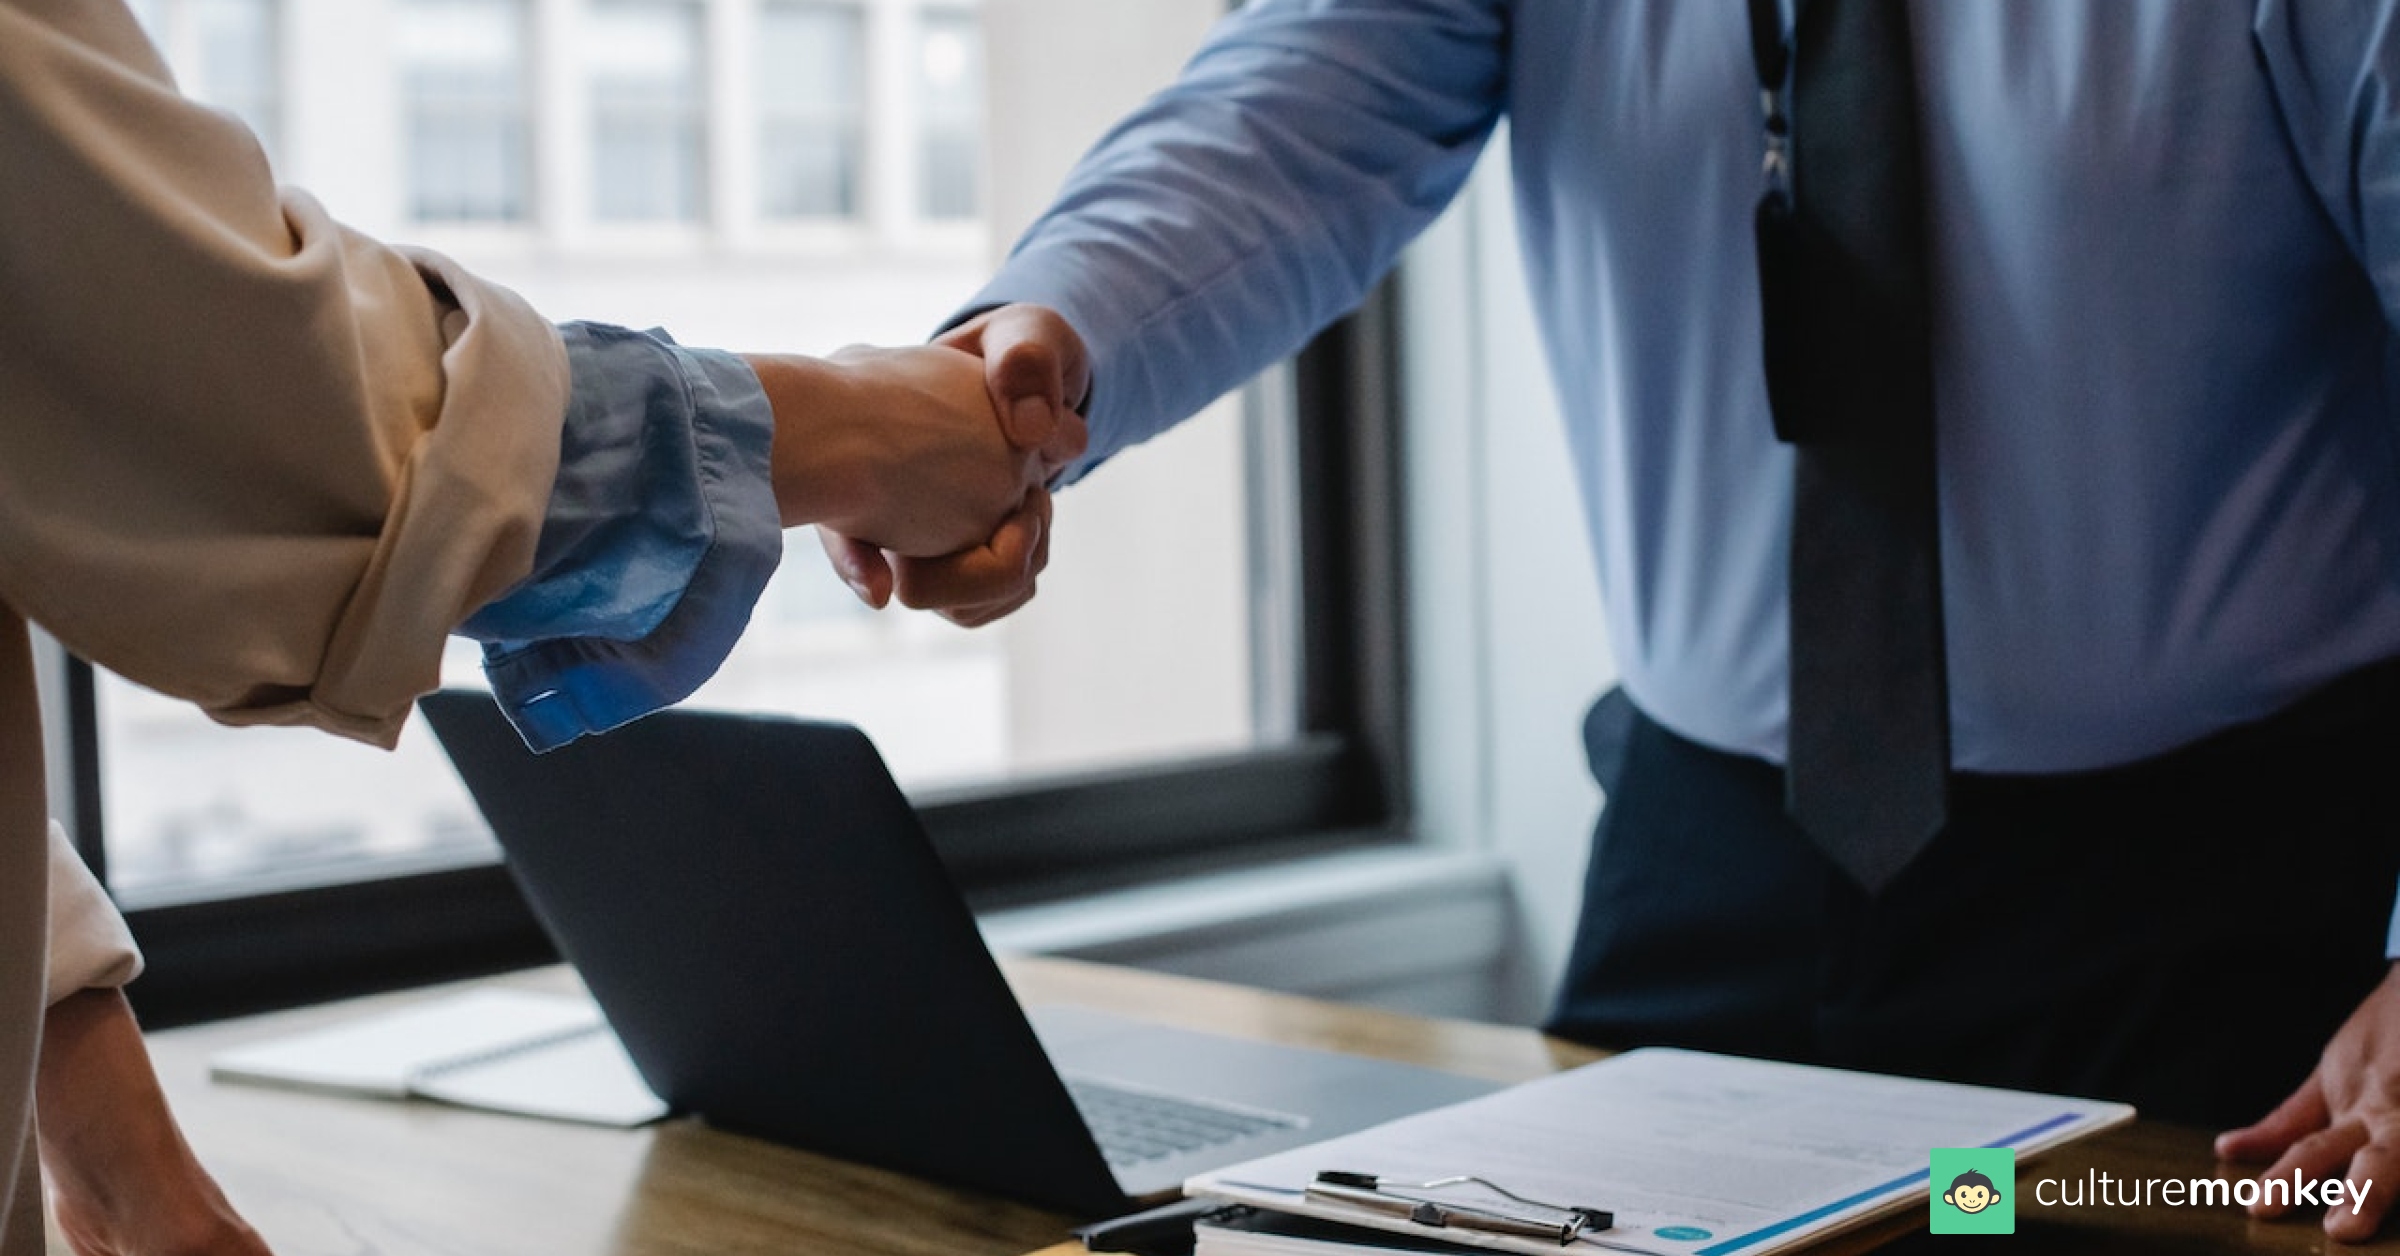 Employer is shaking hands with employee in the workplace